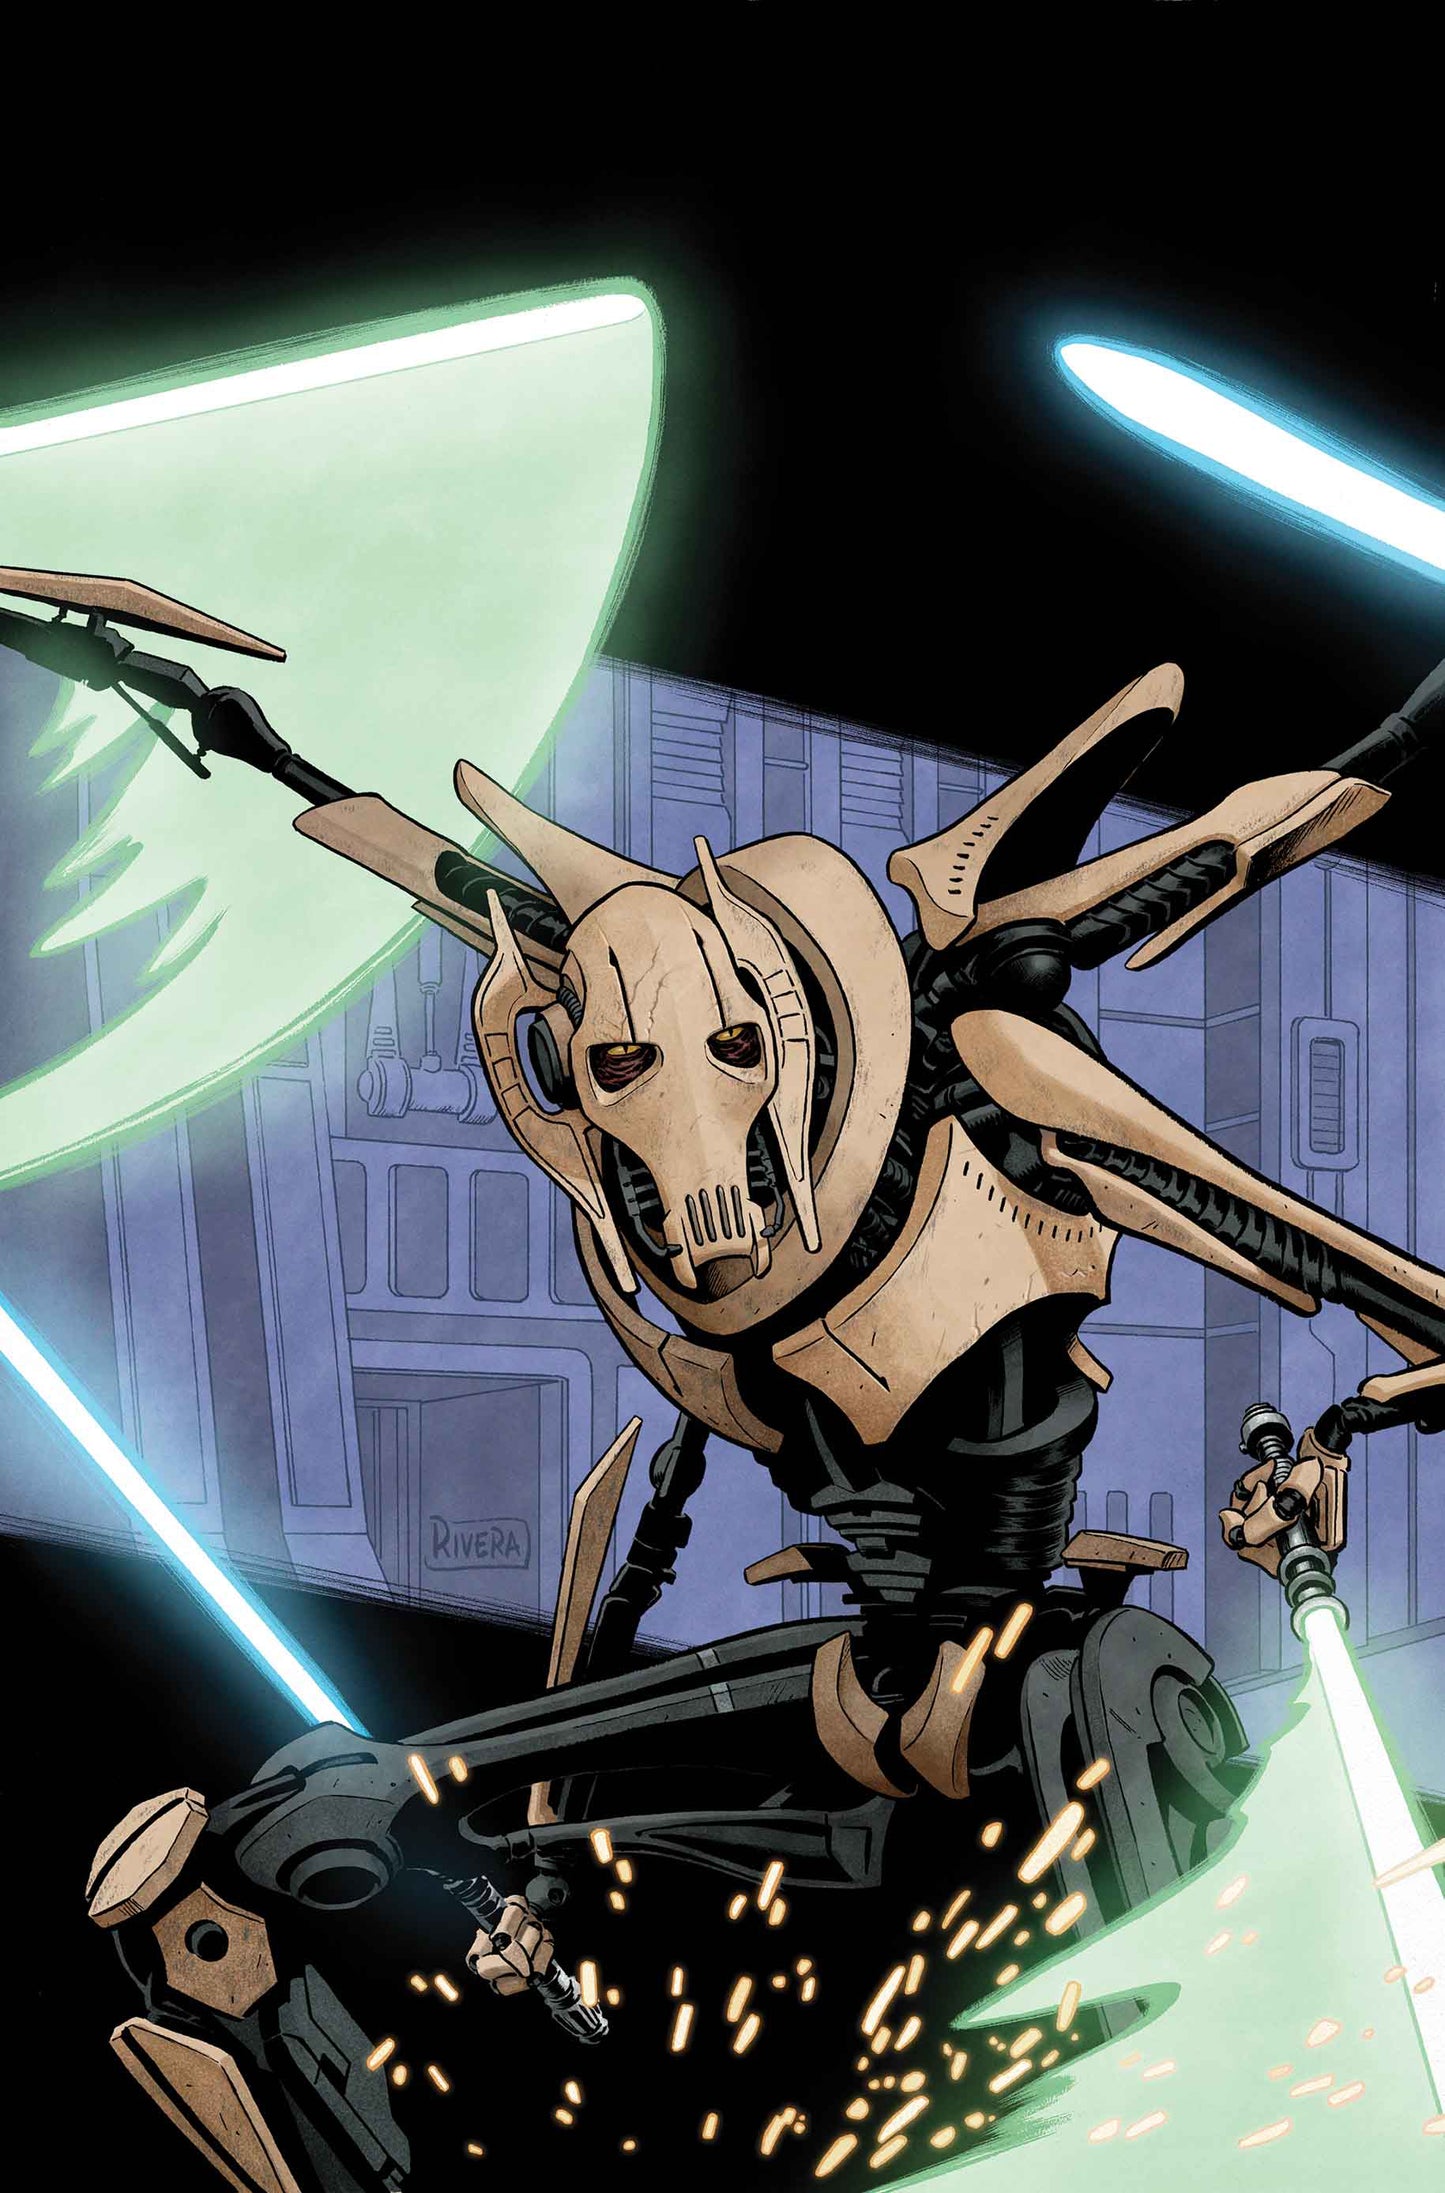 STAR WARS AOR GENERAL GRIEVOUS #1 COVER